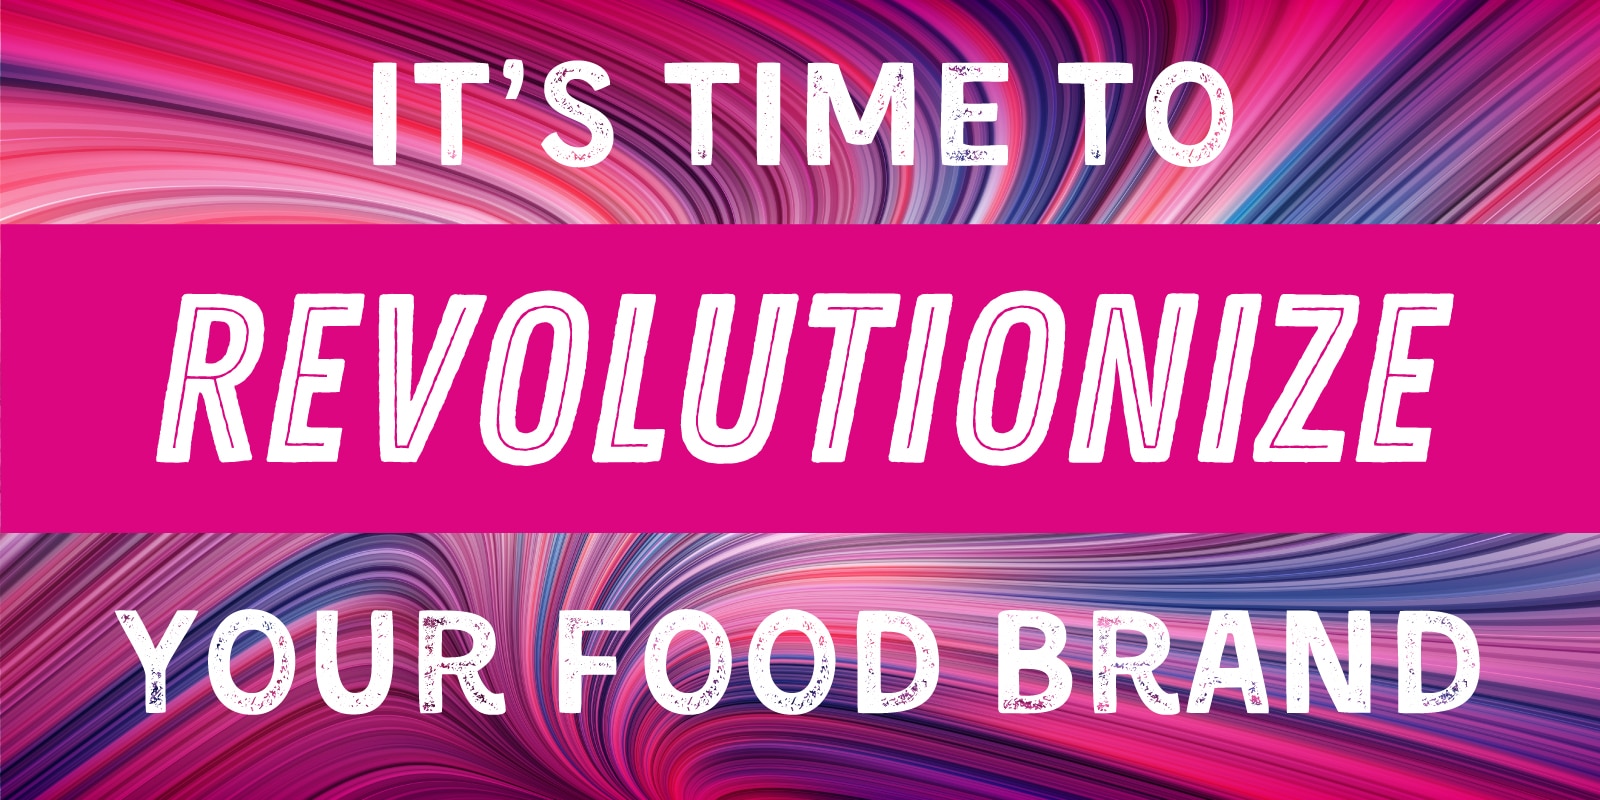 Food brand redesign - time to revolutionize your food brand